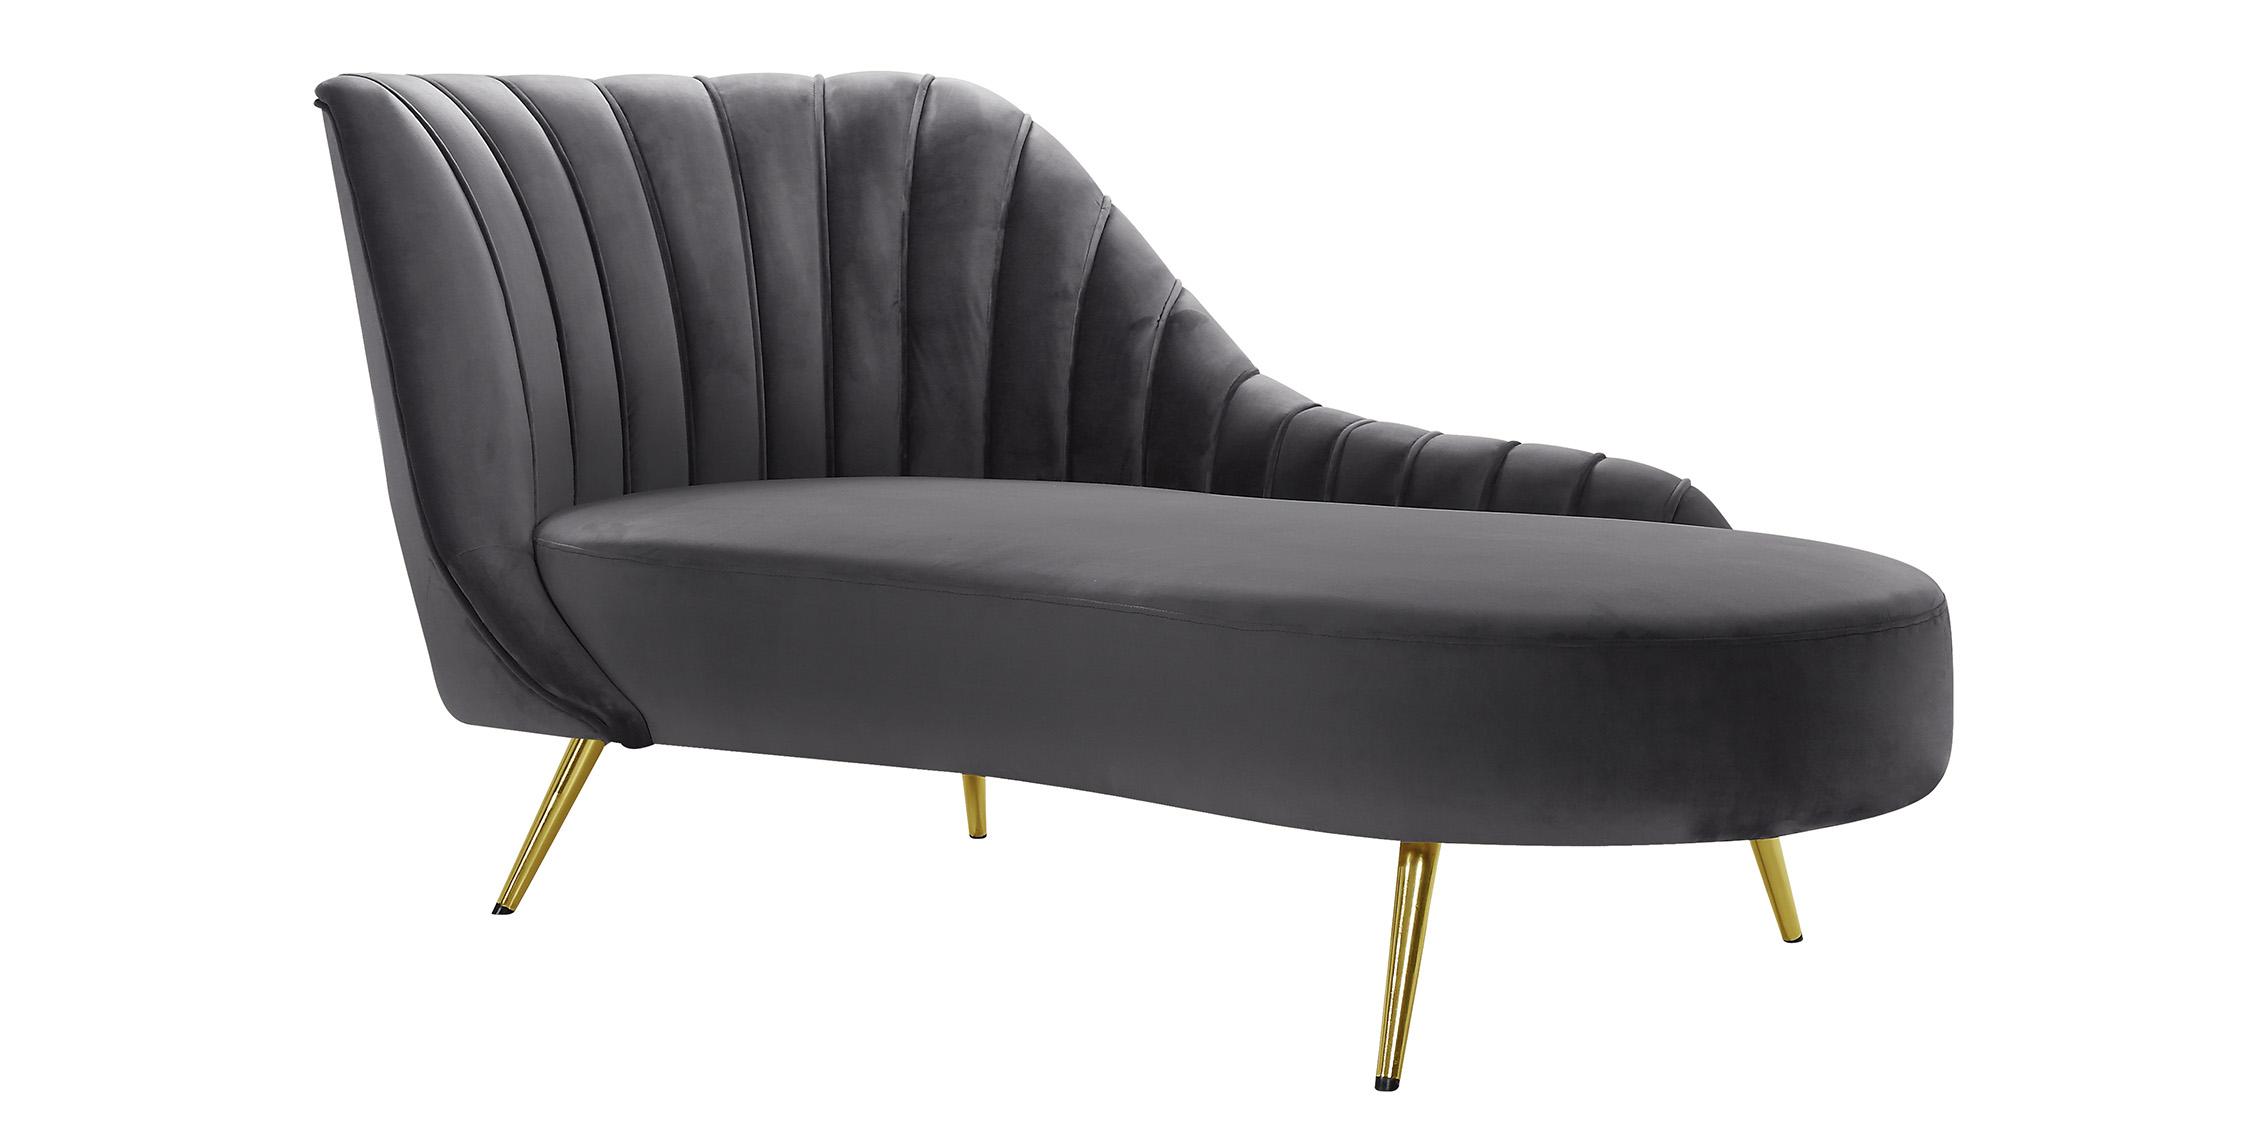 Contemporary, Modern Chaise Margo 622Grey-Chaise 622Grey-Chaise in Gray Velvet